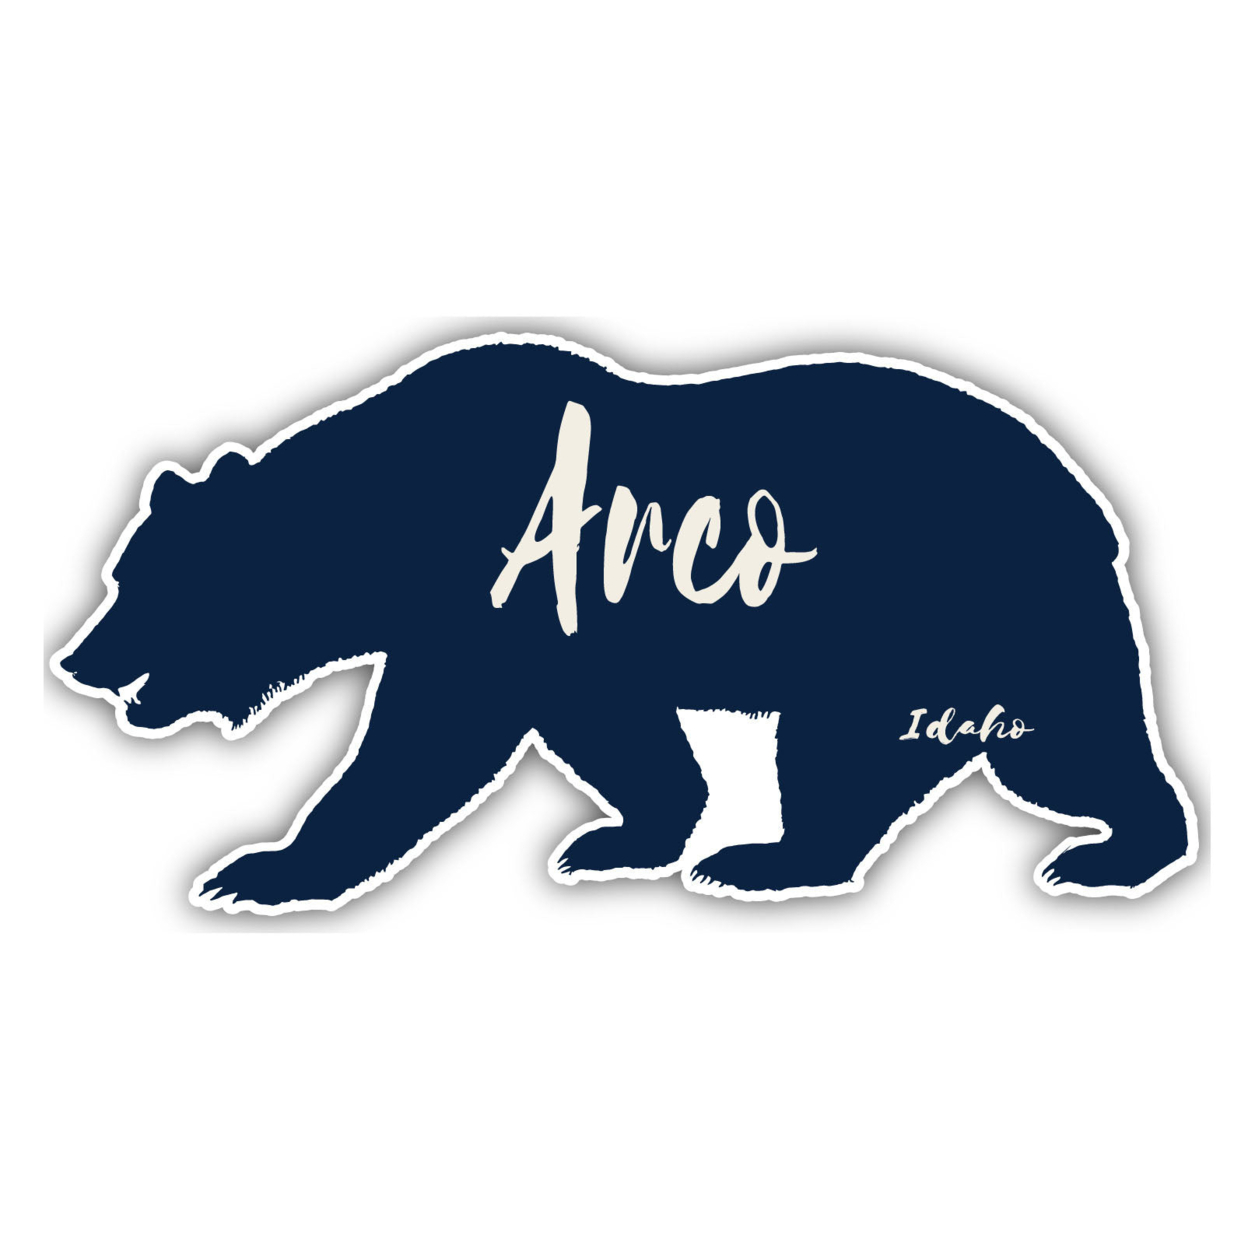 Arco Idaho Souvenir Decorative Stickers (Choose Theme And Size) - 4-Pack, 2-Inch, Great Outdoors